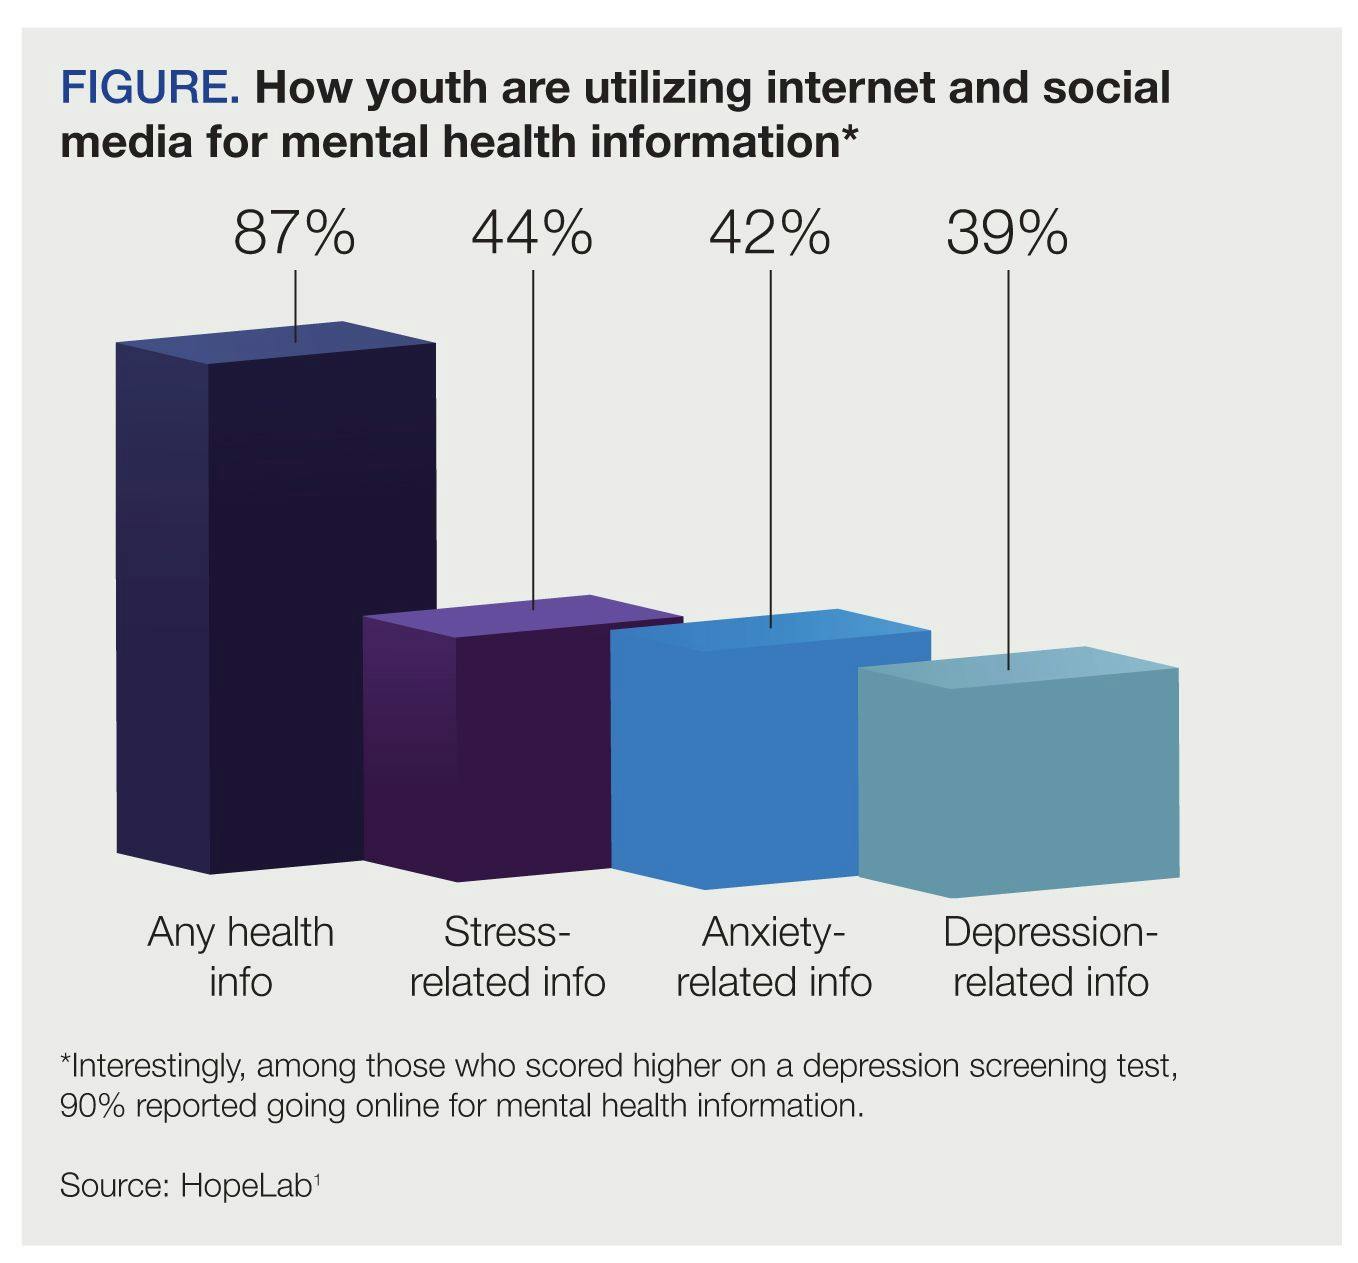 adolescents search for online health information